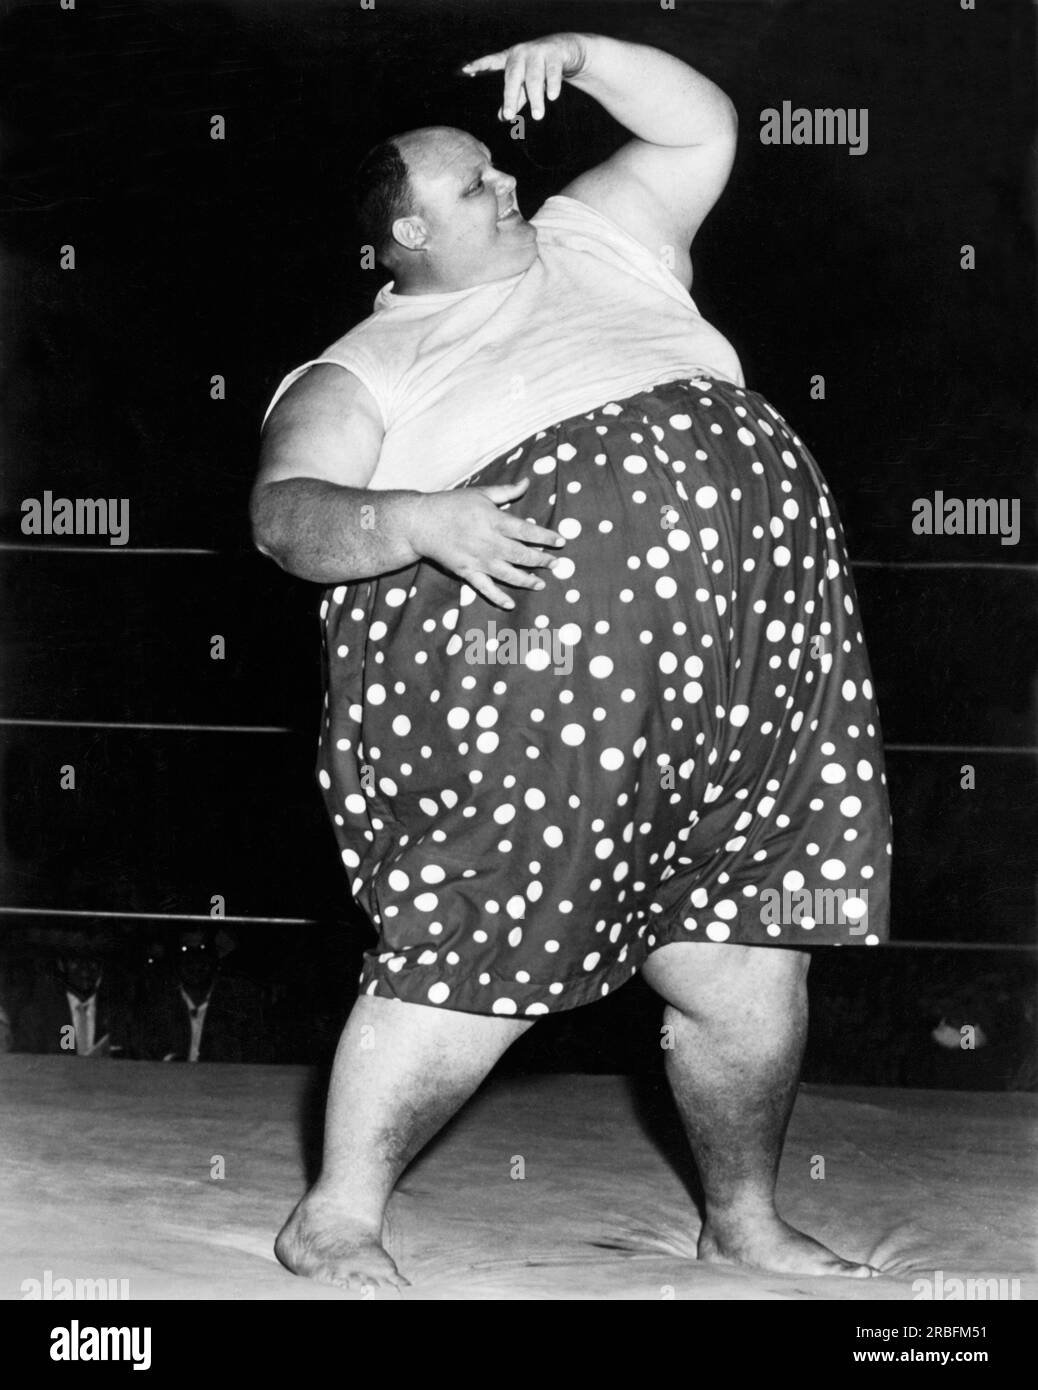 United States:  c. 1956 A portrait of professional wrestler William Cobb, better known as Happy Humphrey. He was the heaviest professional wrestler of all time, averaging 750 pounds during his career with one occasion of weighing in at over 900 pounds. Stock Photo